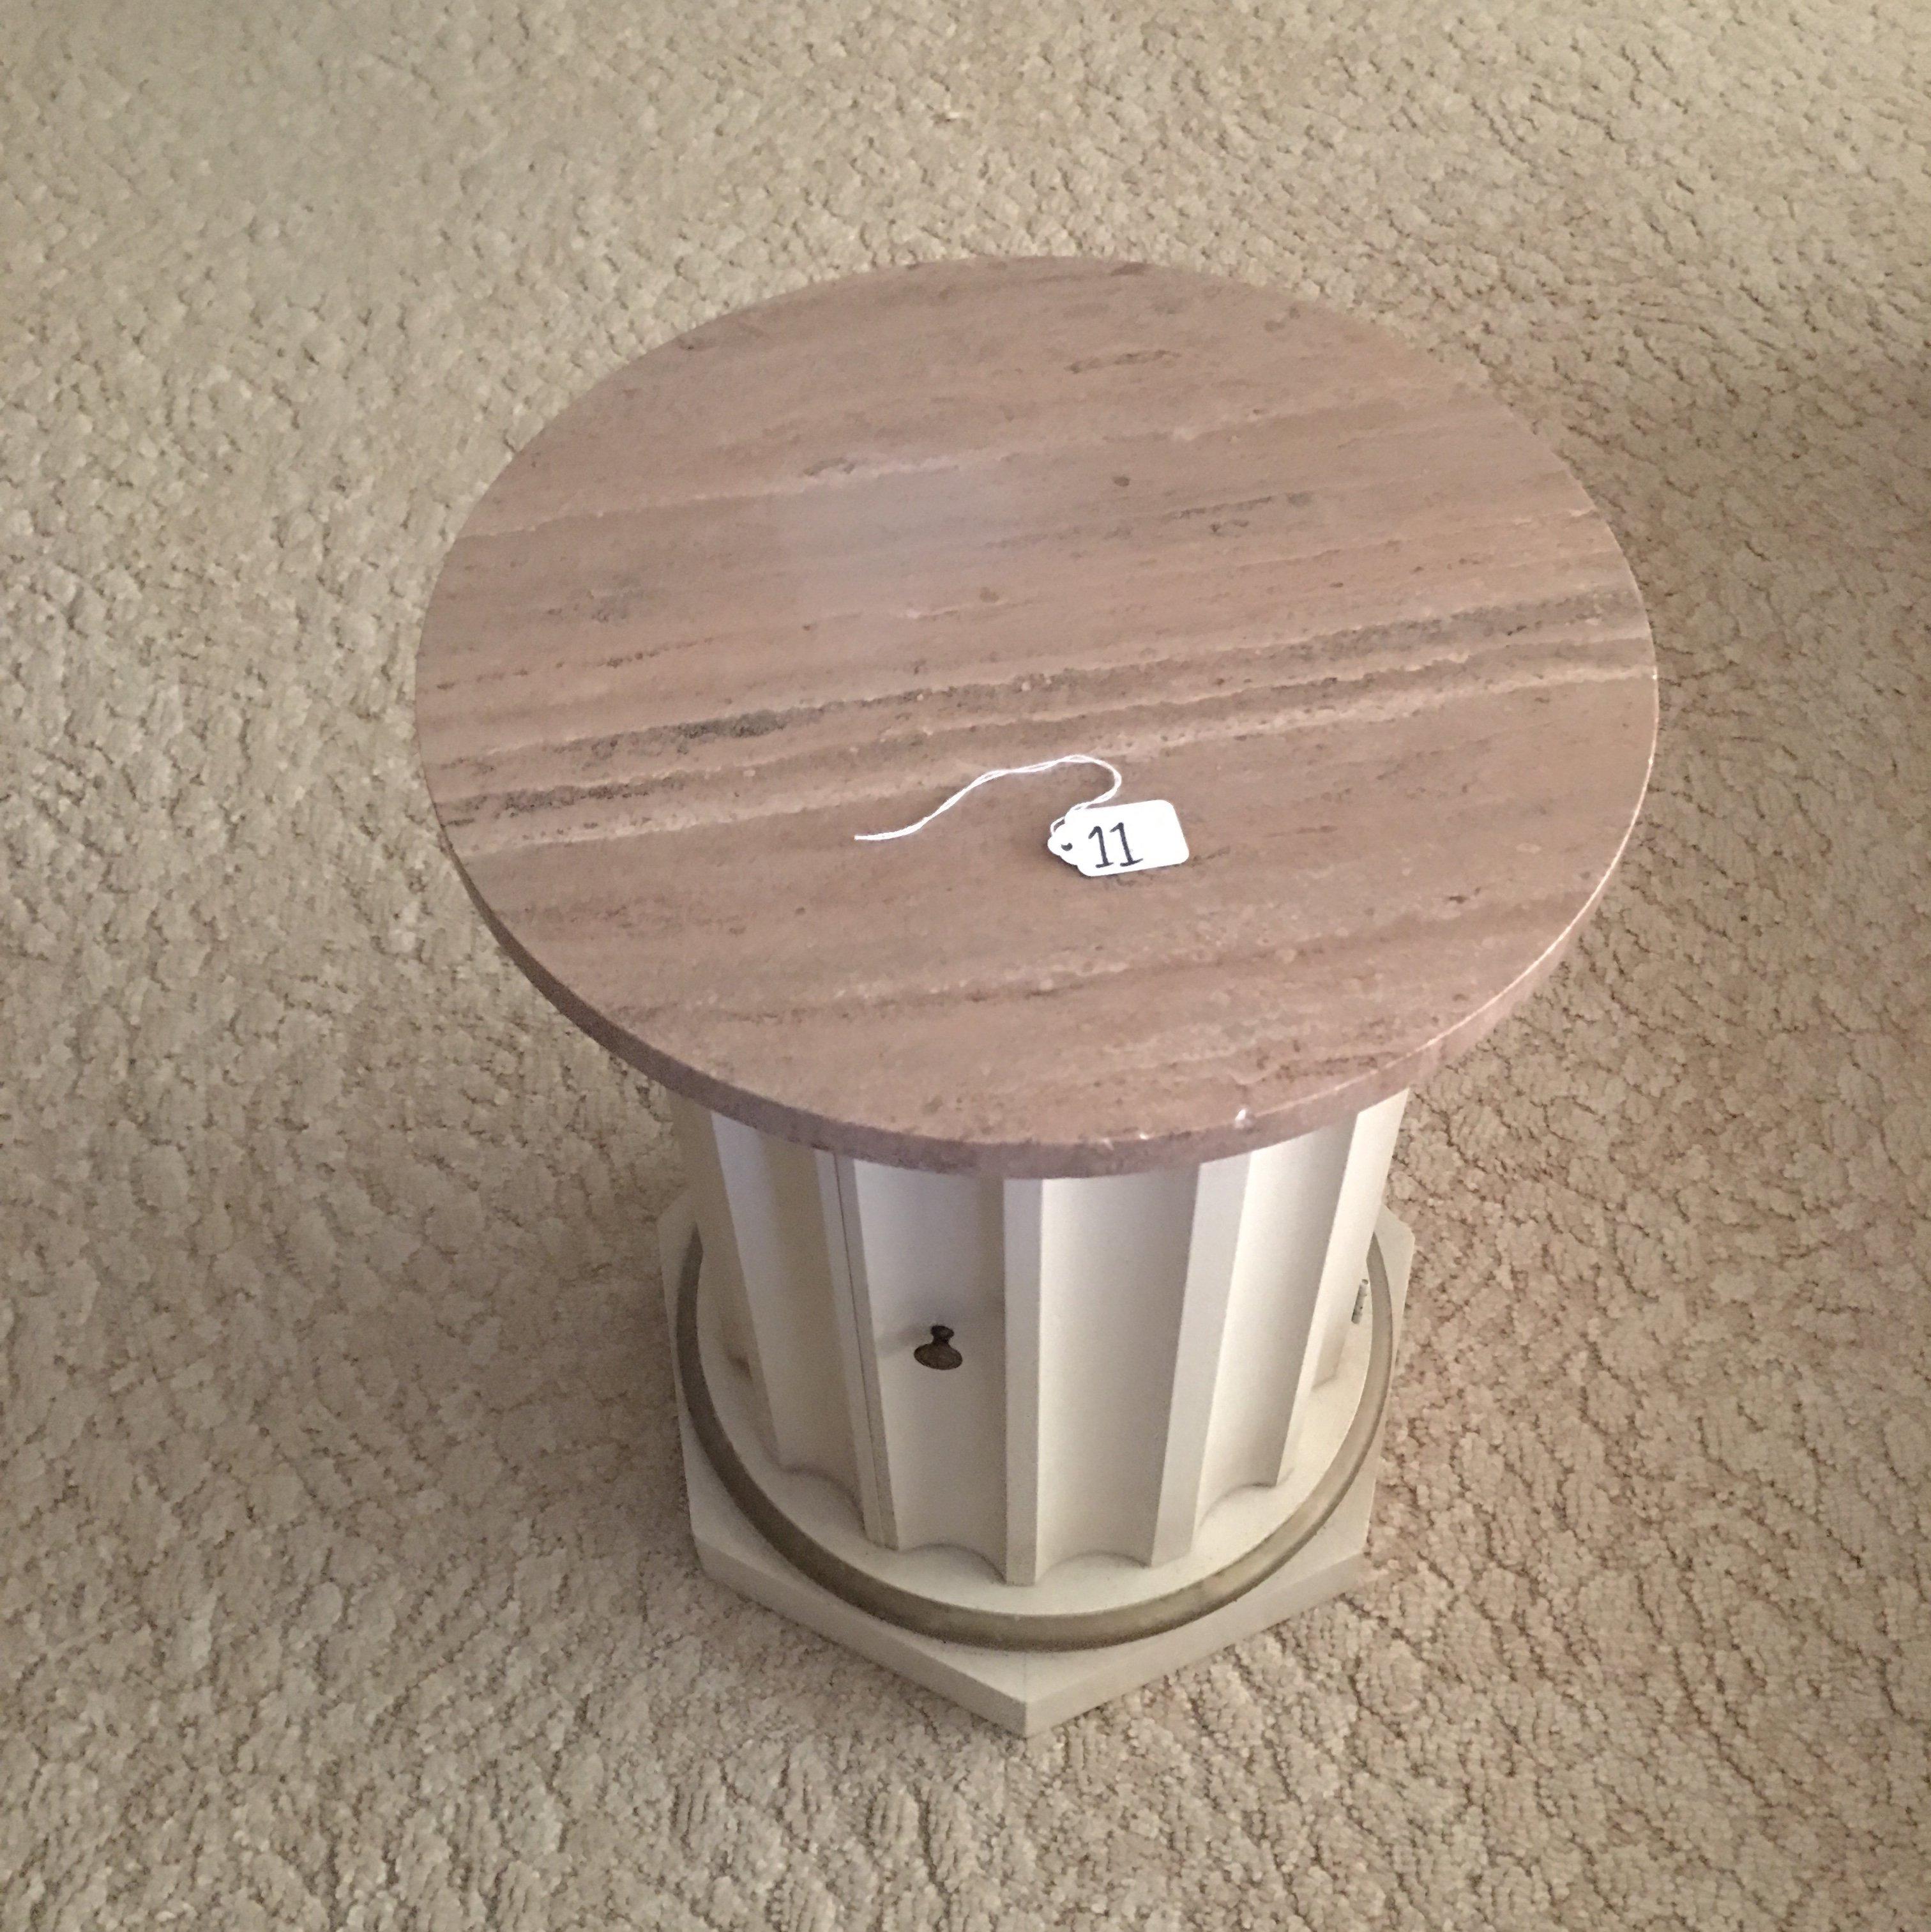 Column Inspired End Table With Marble Top